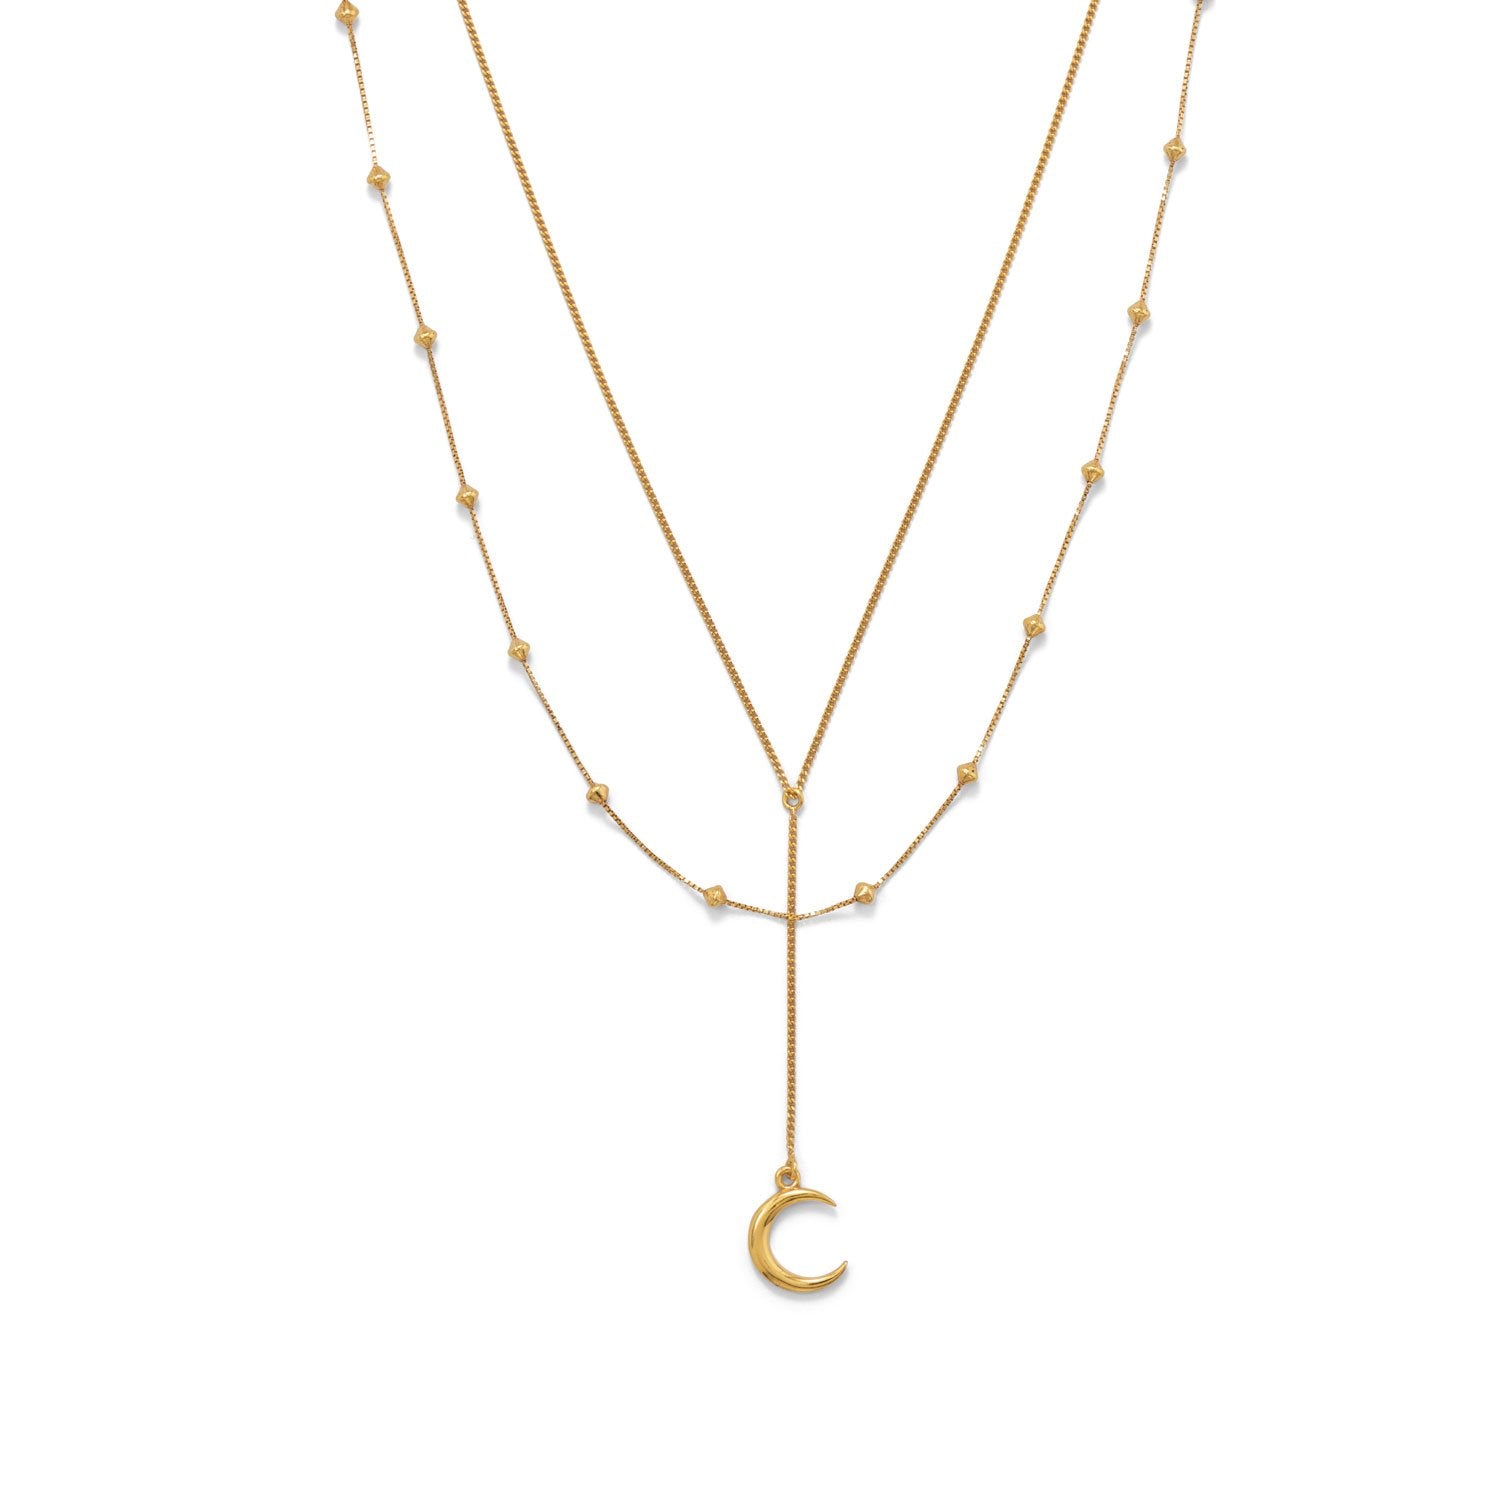 16"+2 14 Karat Gold Plated Double Strand Moon Necklace